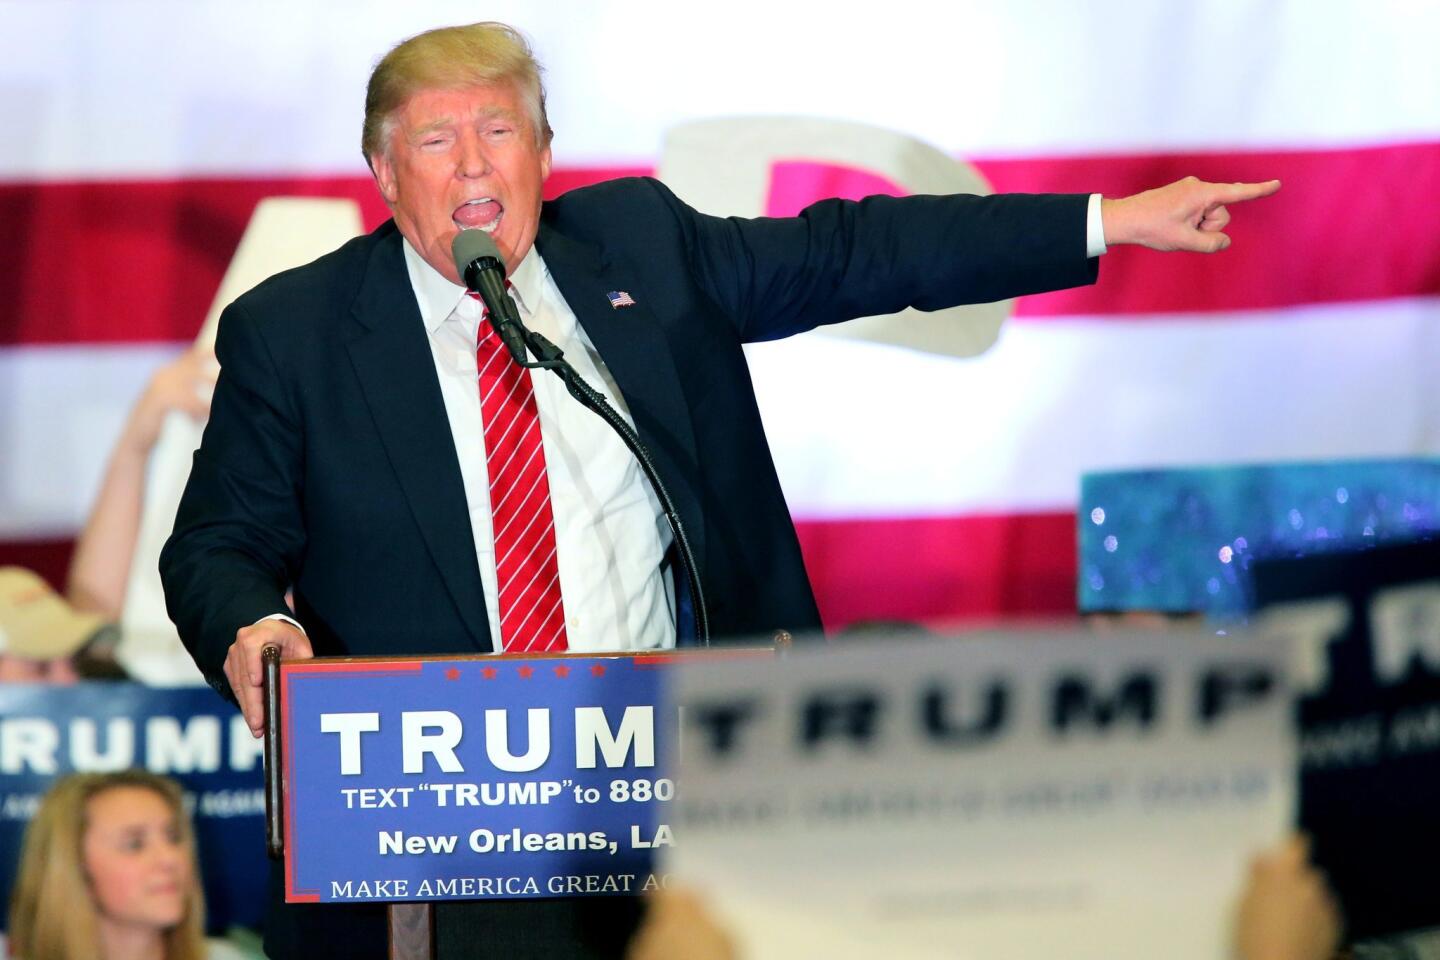 Donald Trump campaigns in New Orleans